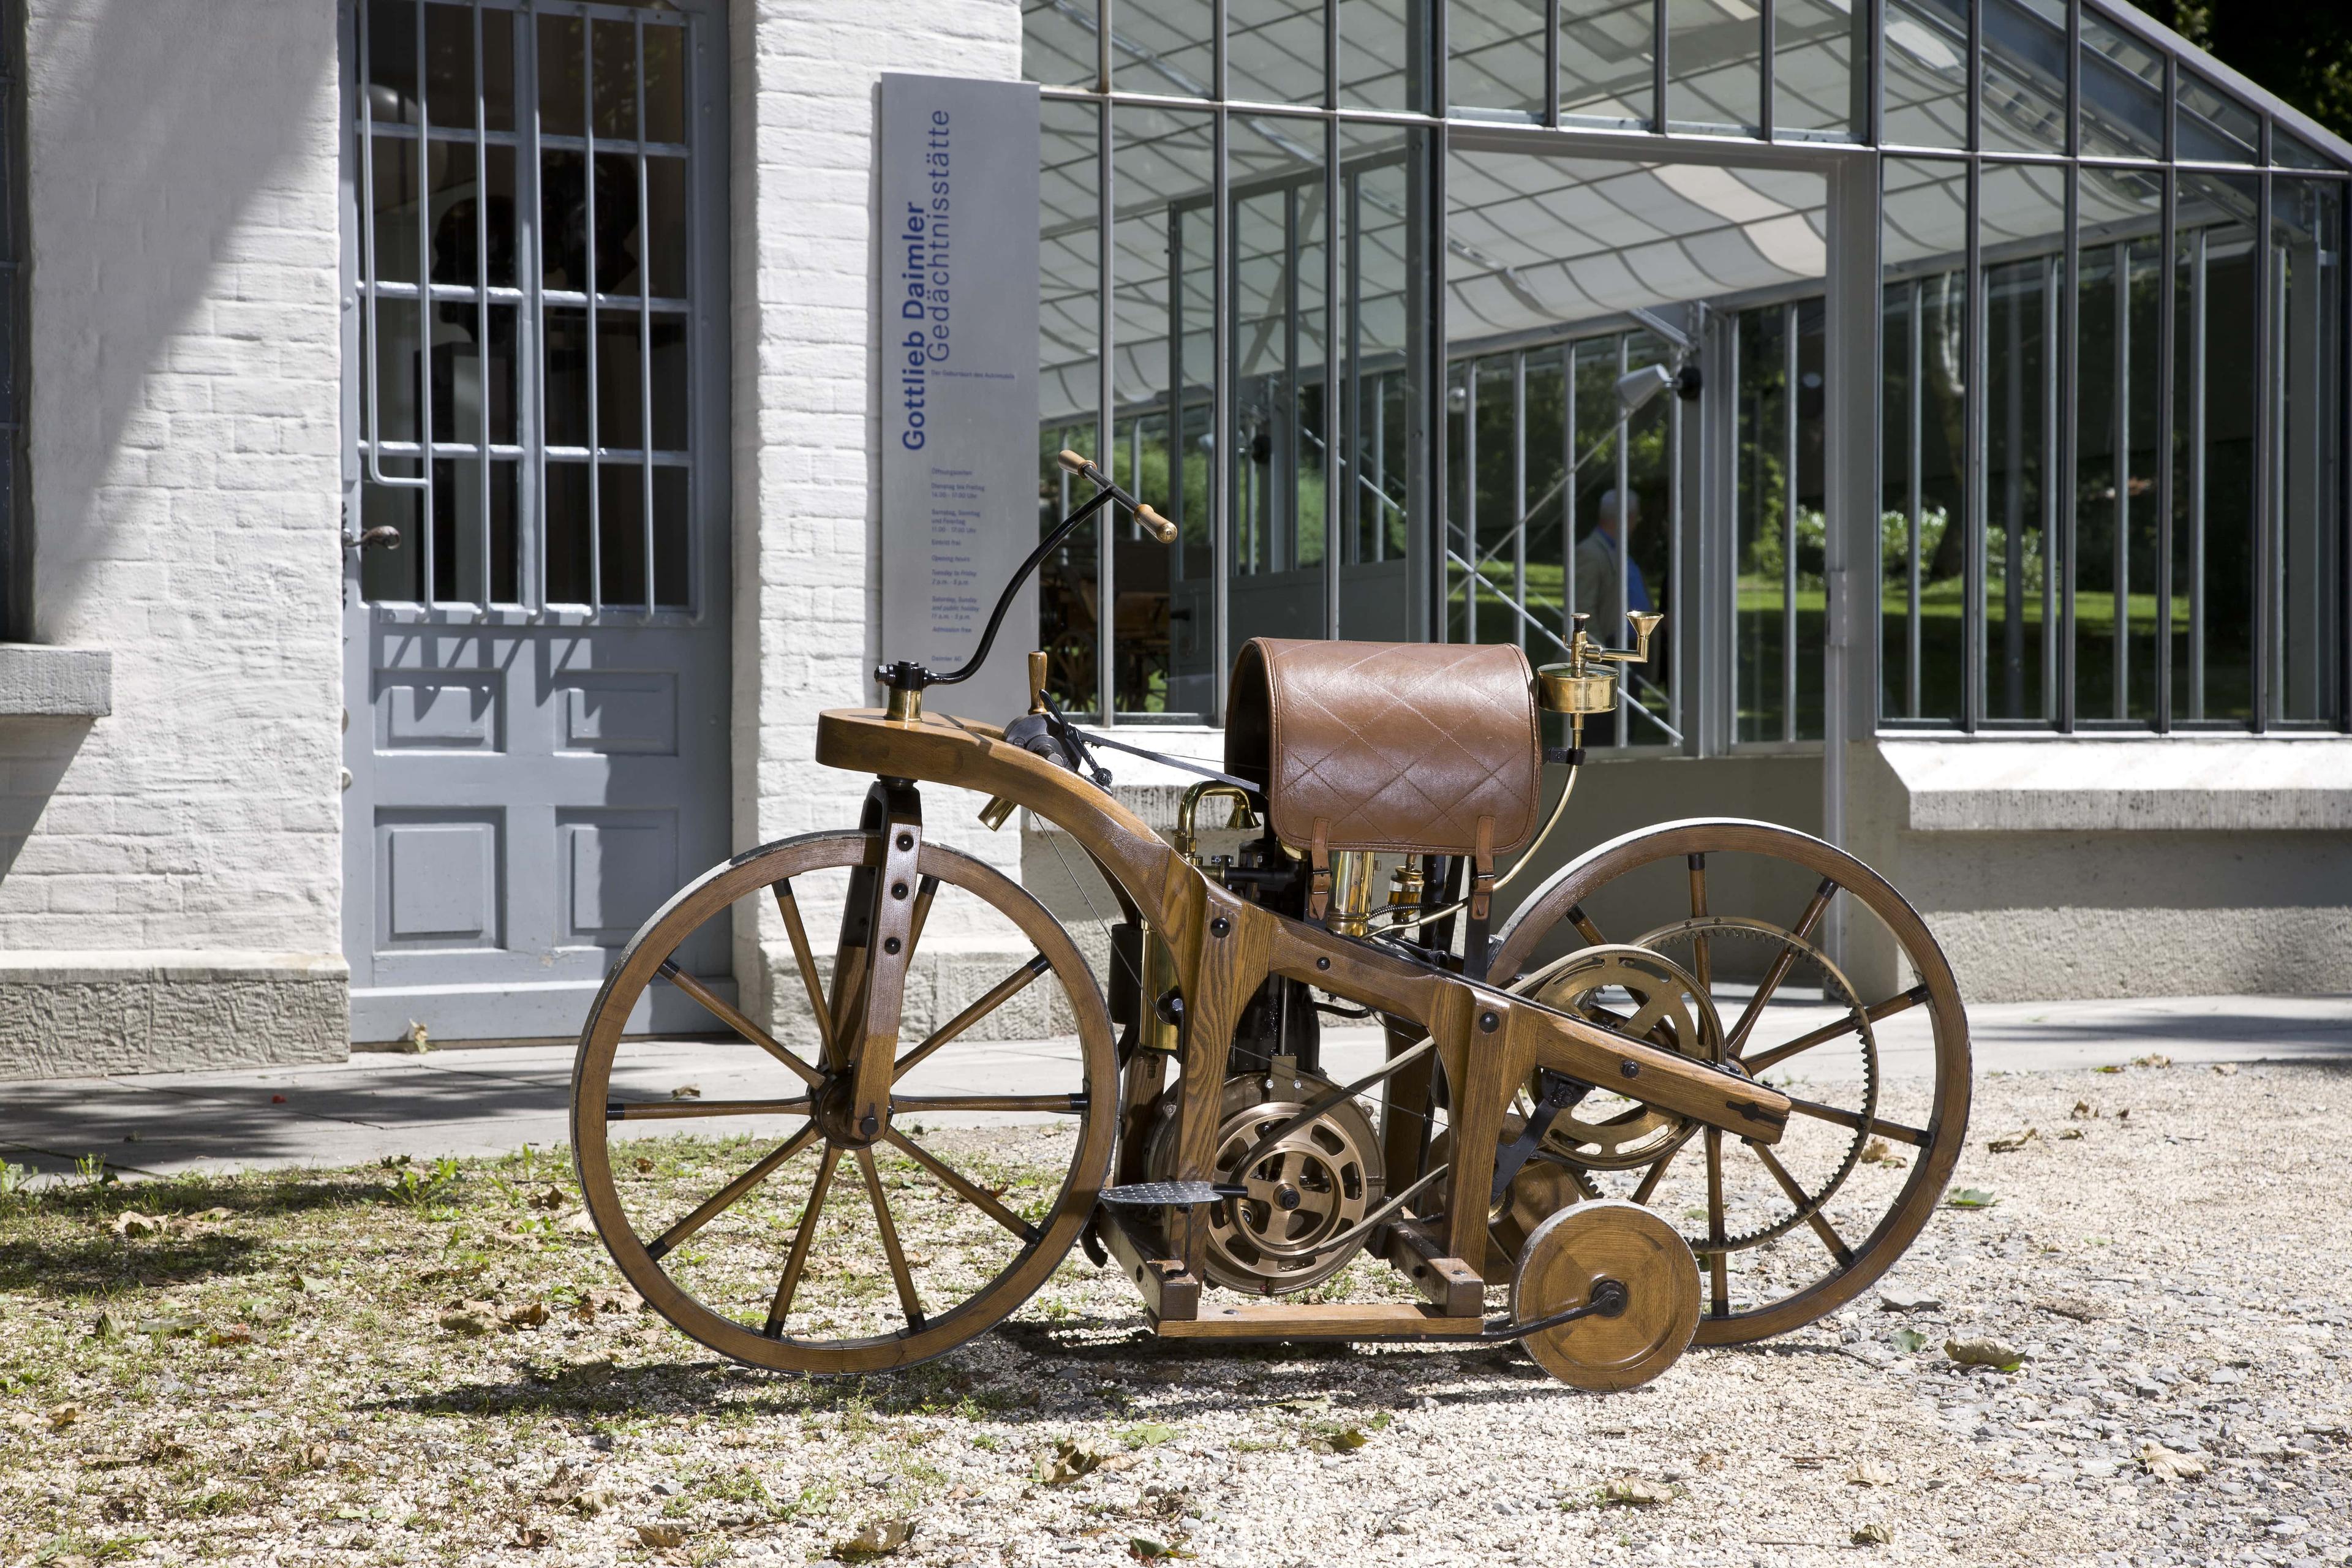 Daimler and Maybach produced the world’s first motorcycle.